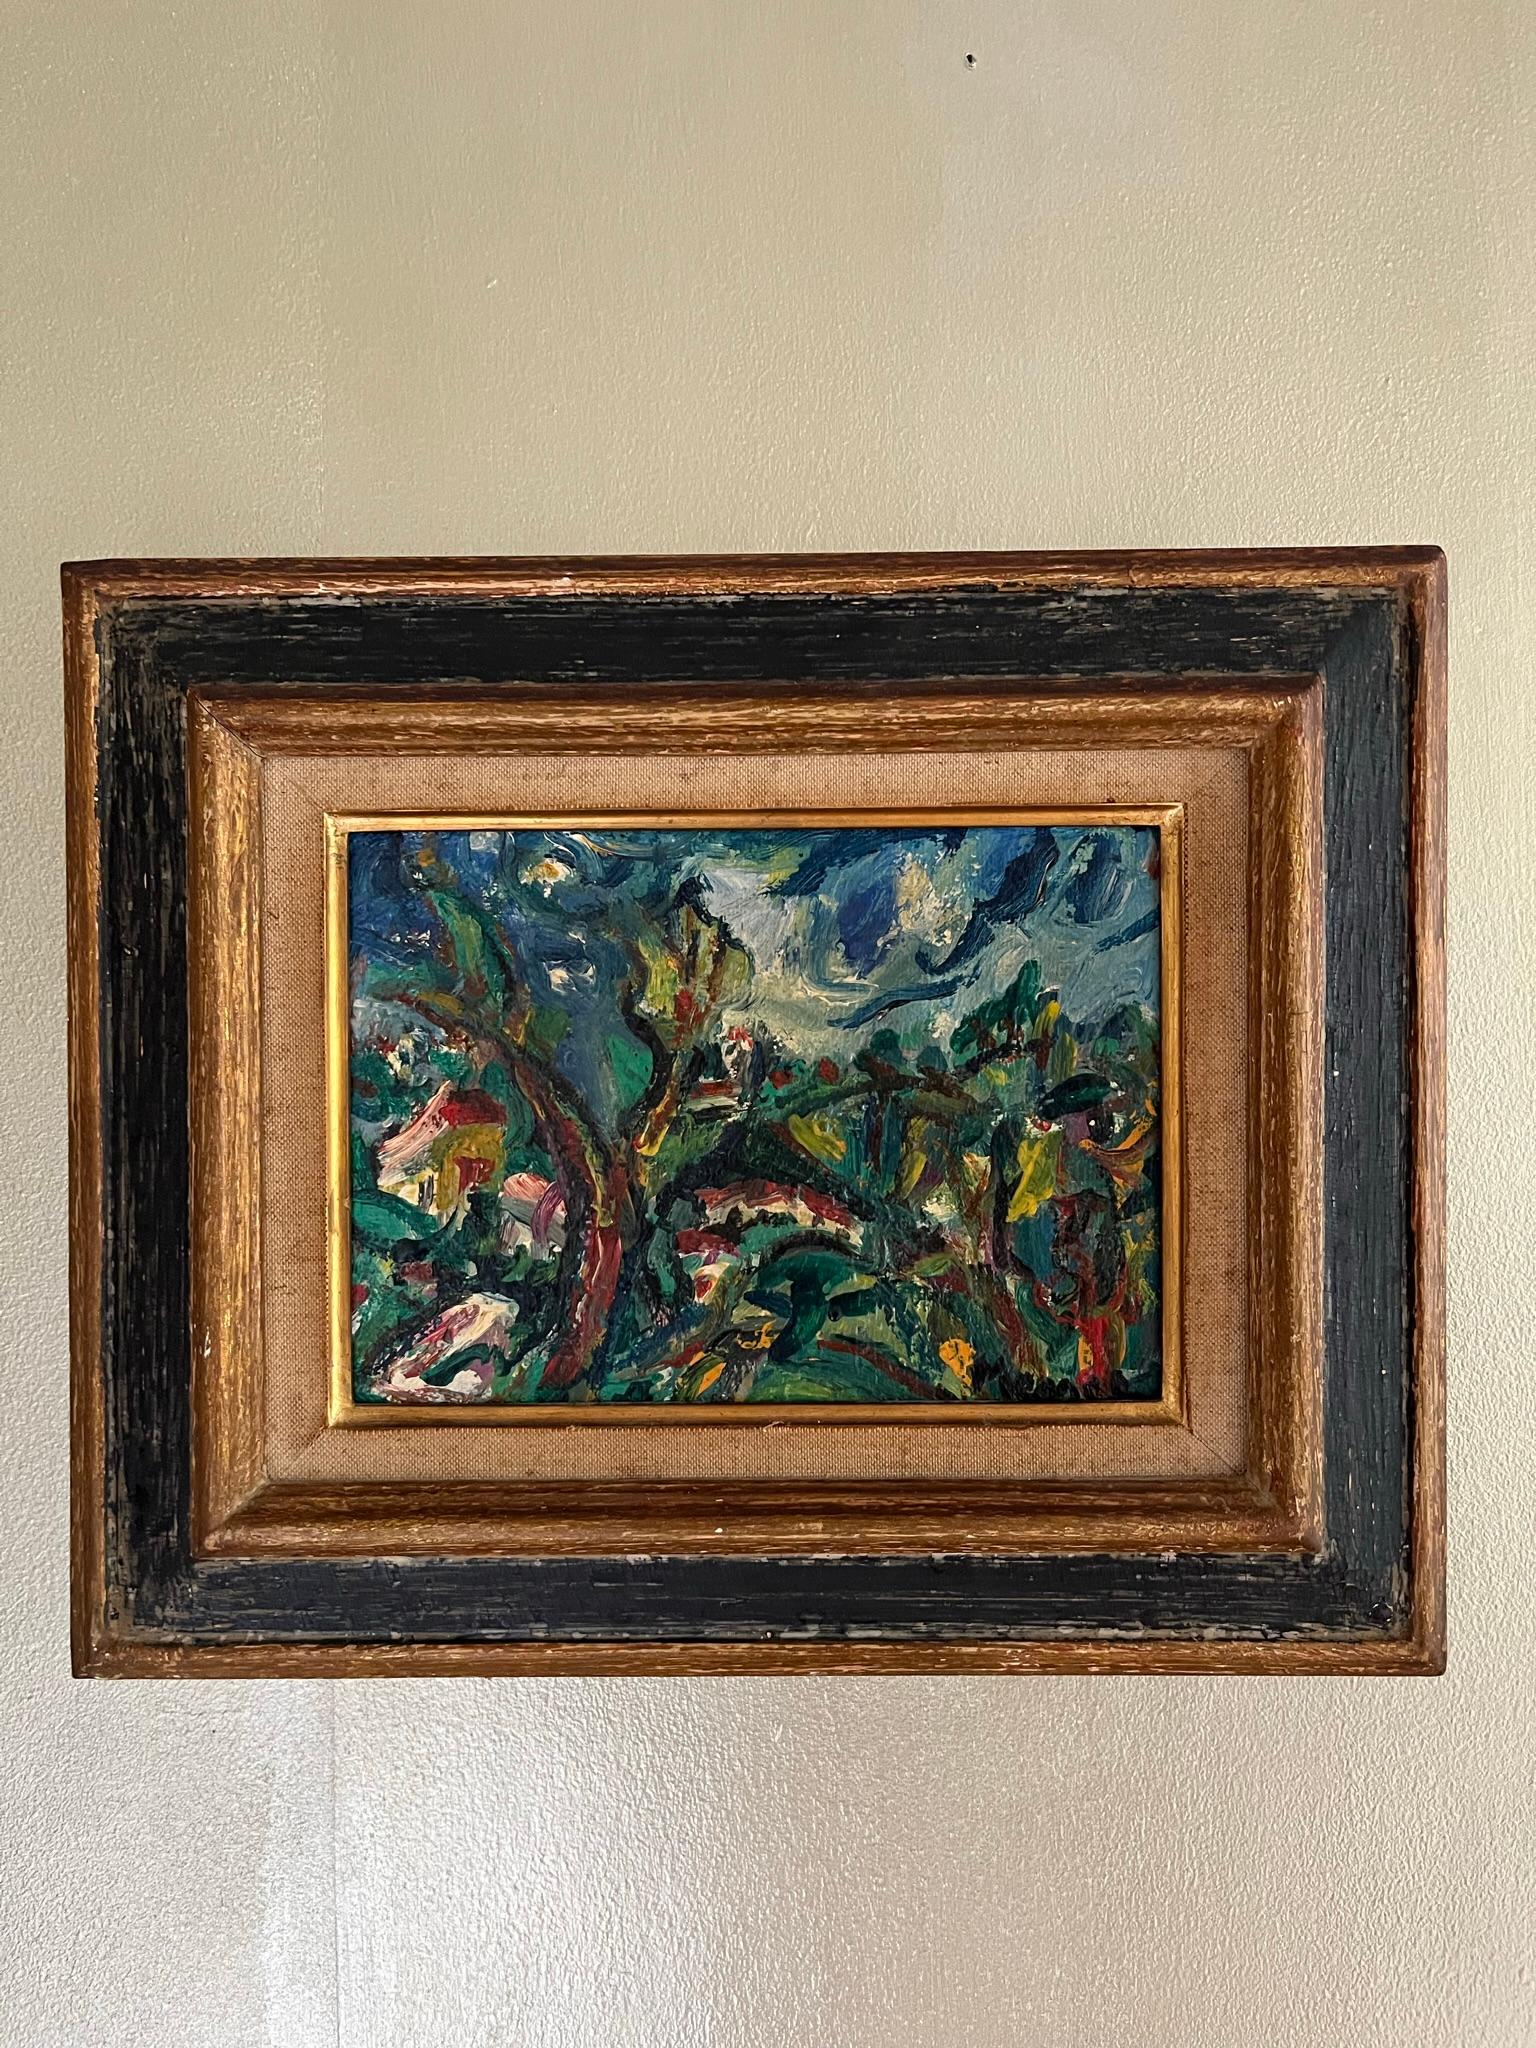 A beautiful small Post-Impressionist oil on canvas signed Menés. Portuguese school, influenced by Bonnard. 